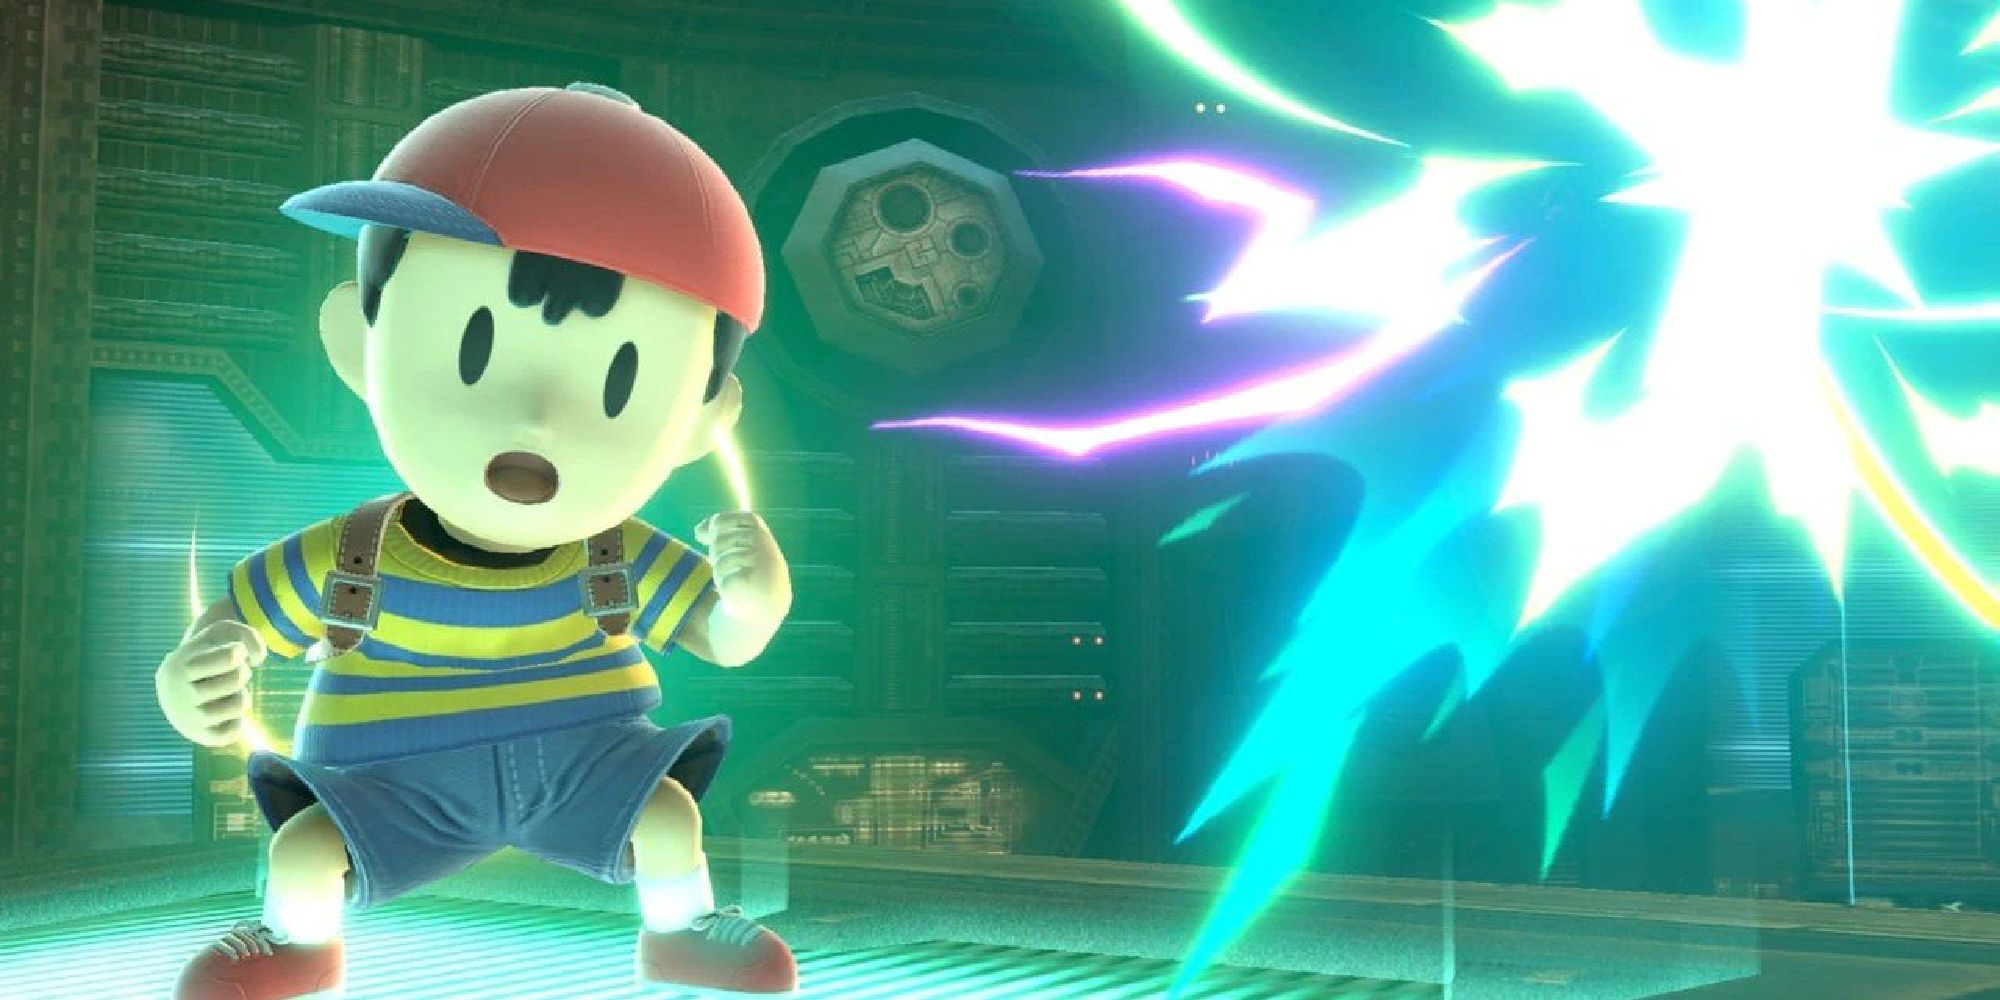 Ness using PK Pulse on Frigate Orpheon in Super Smash Bros Ultimate